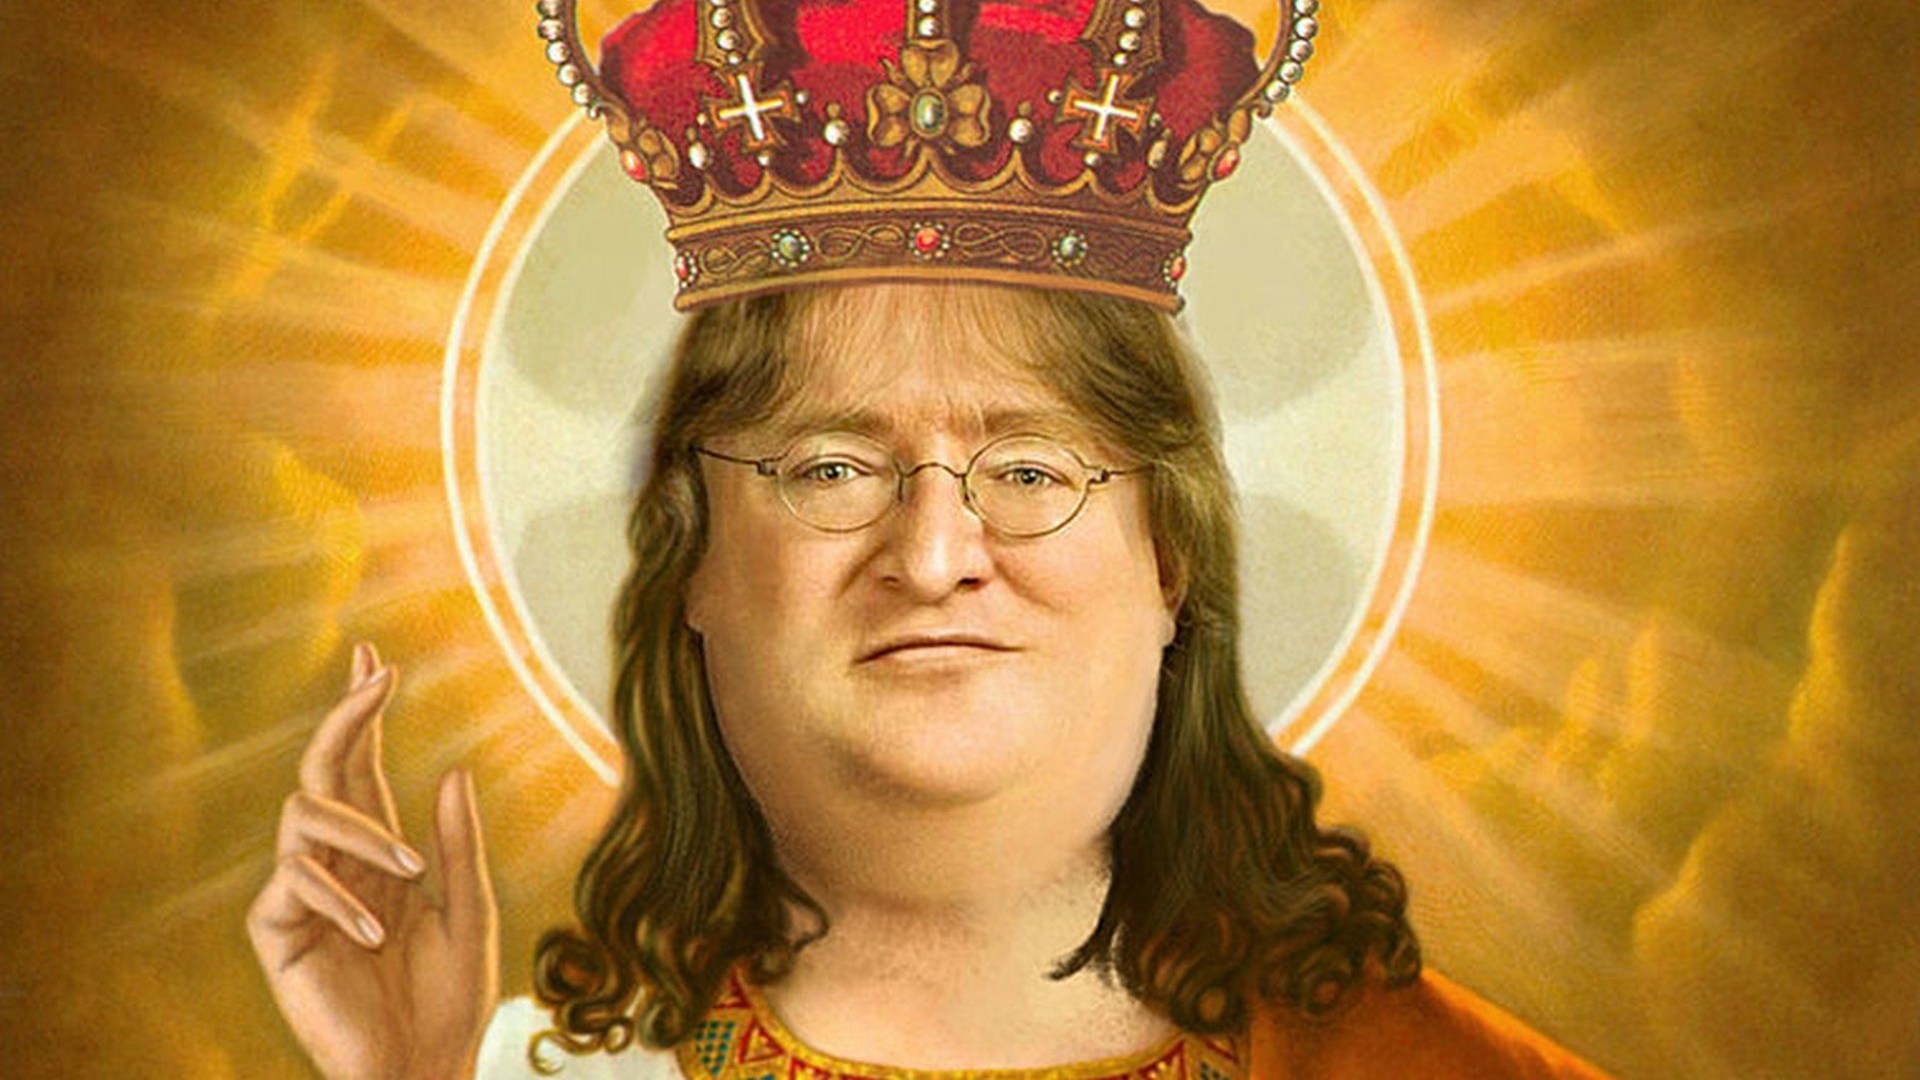 GabeN burned out on WoW, so he's playing FFXIV on Steam Deck